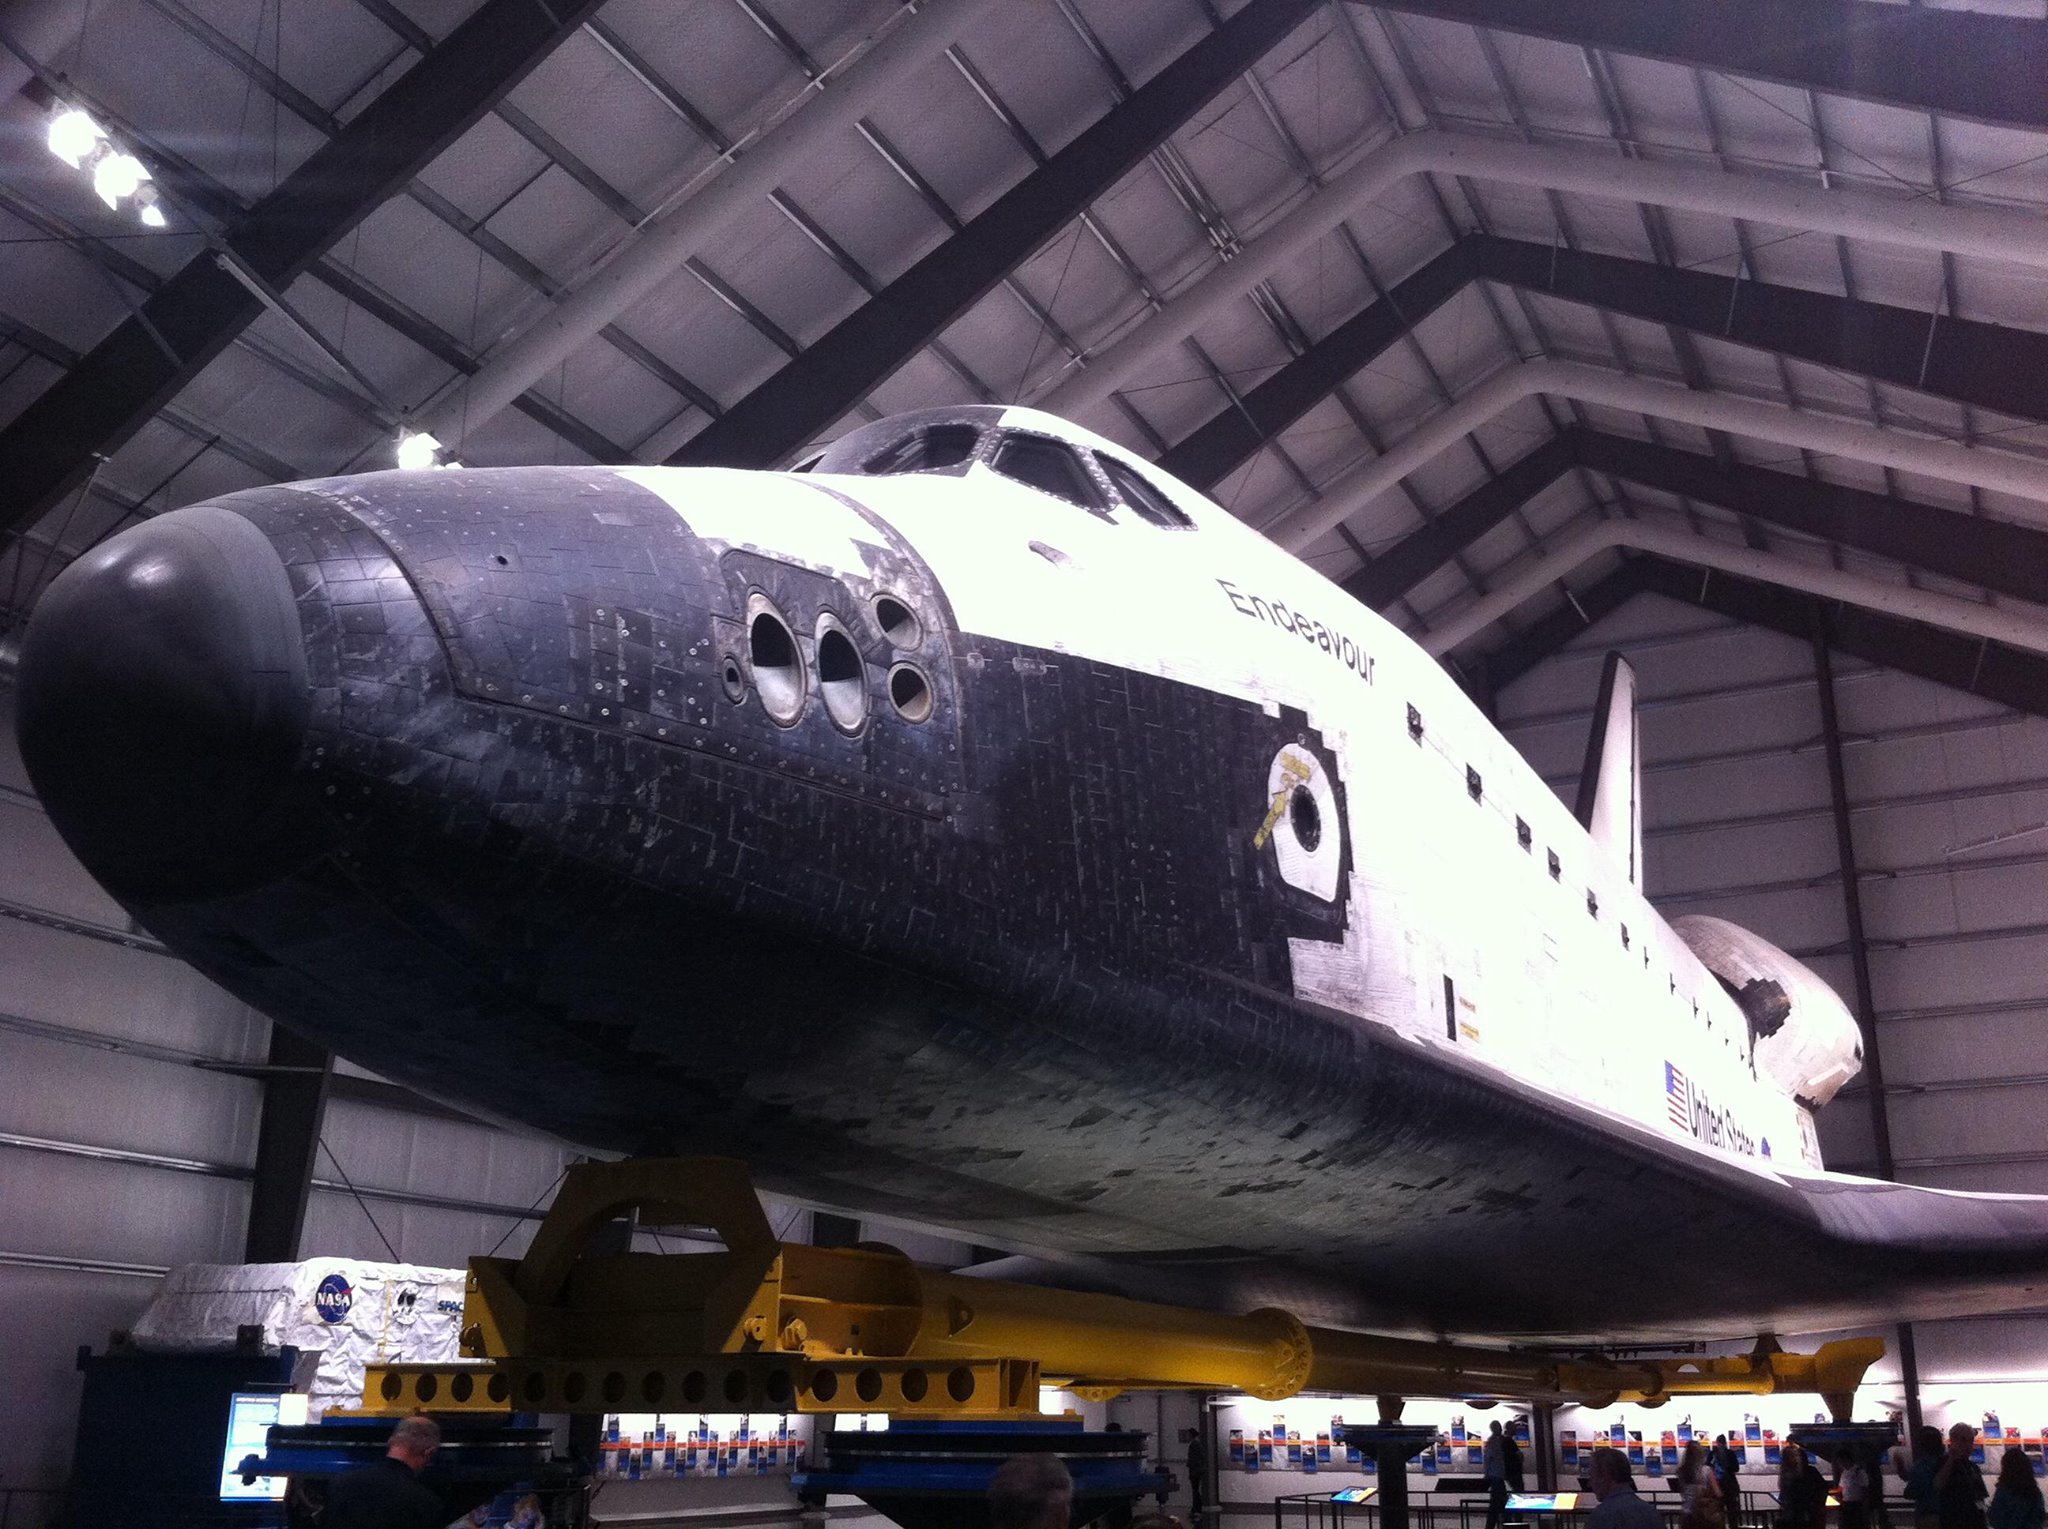 length of space shuttle endeavour